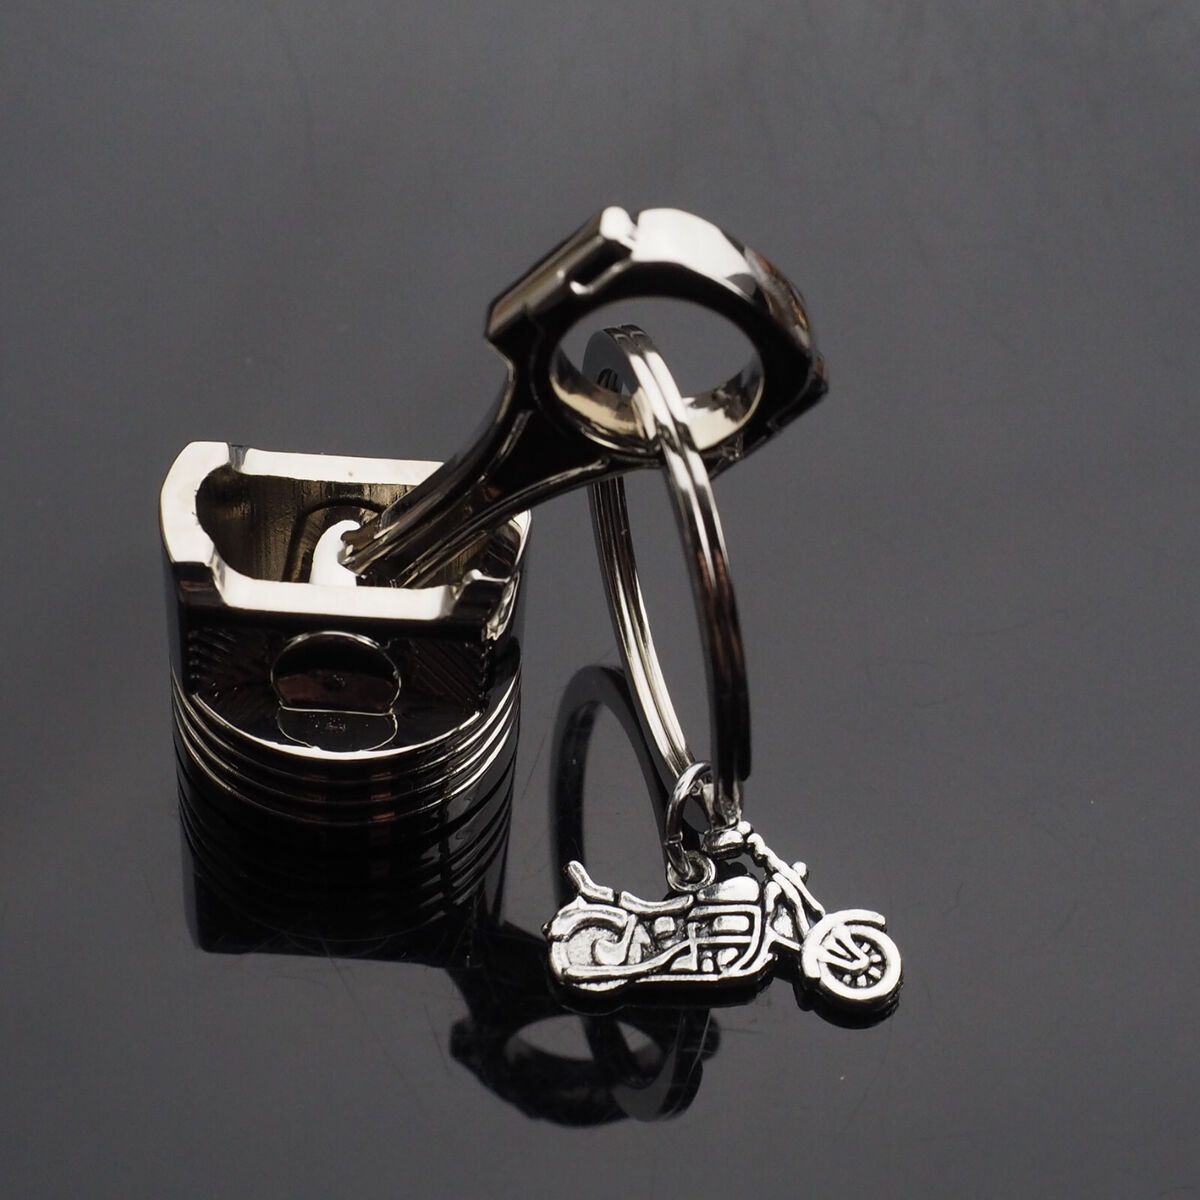 Flaunt your engine love with a piston power keychain